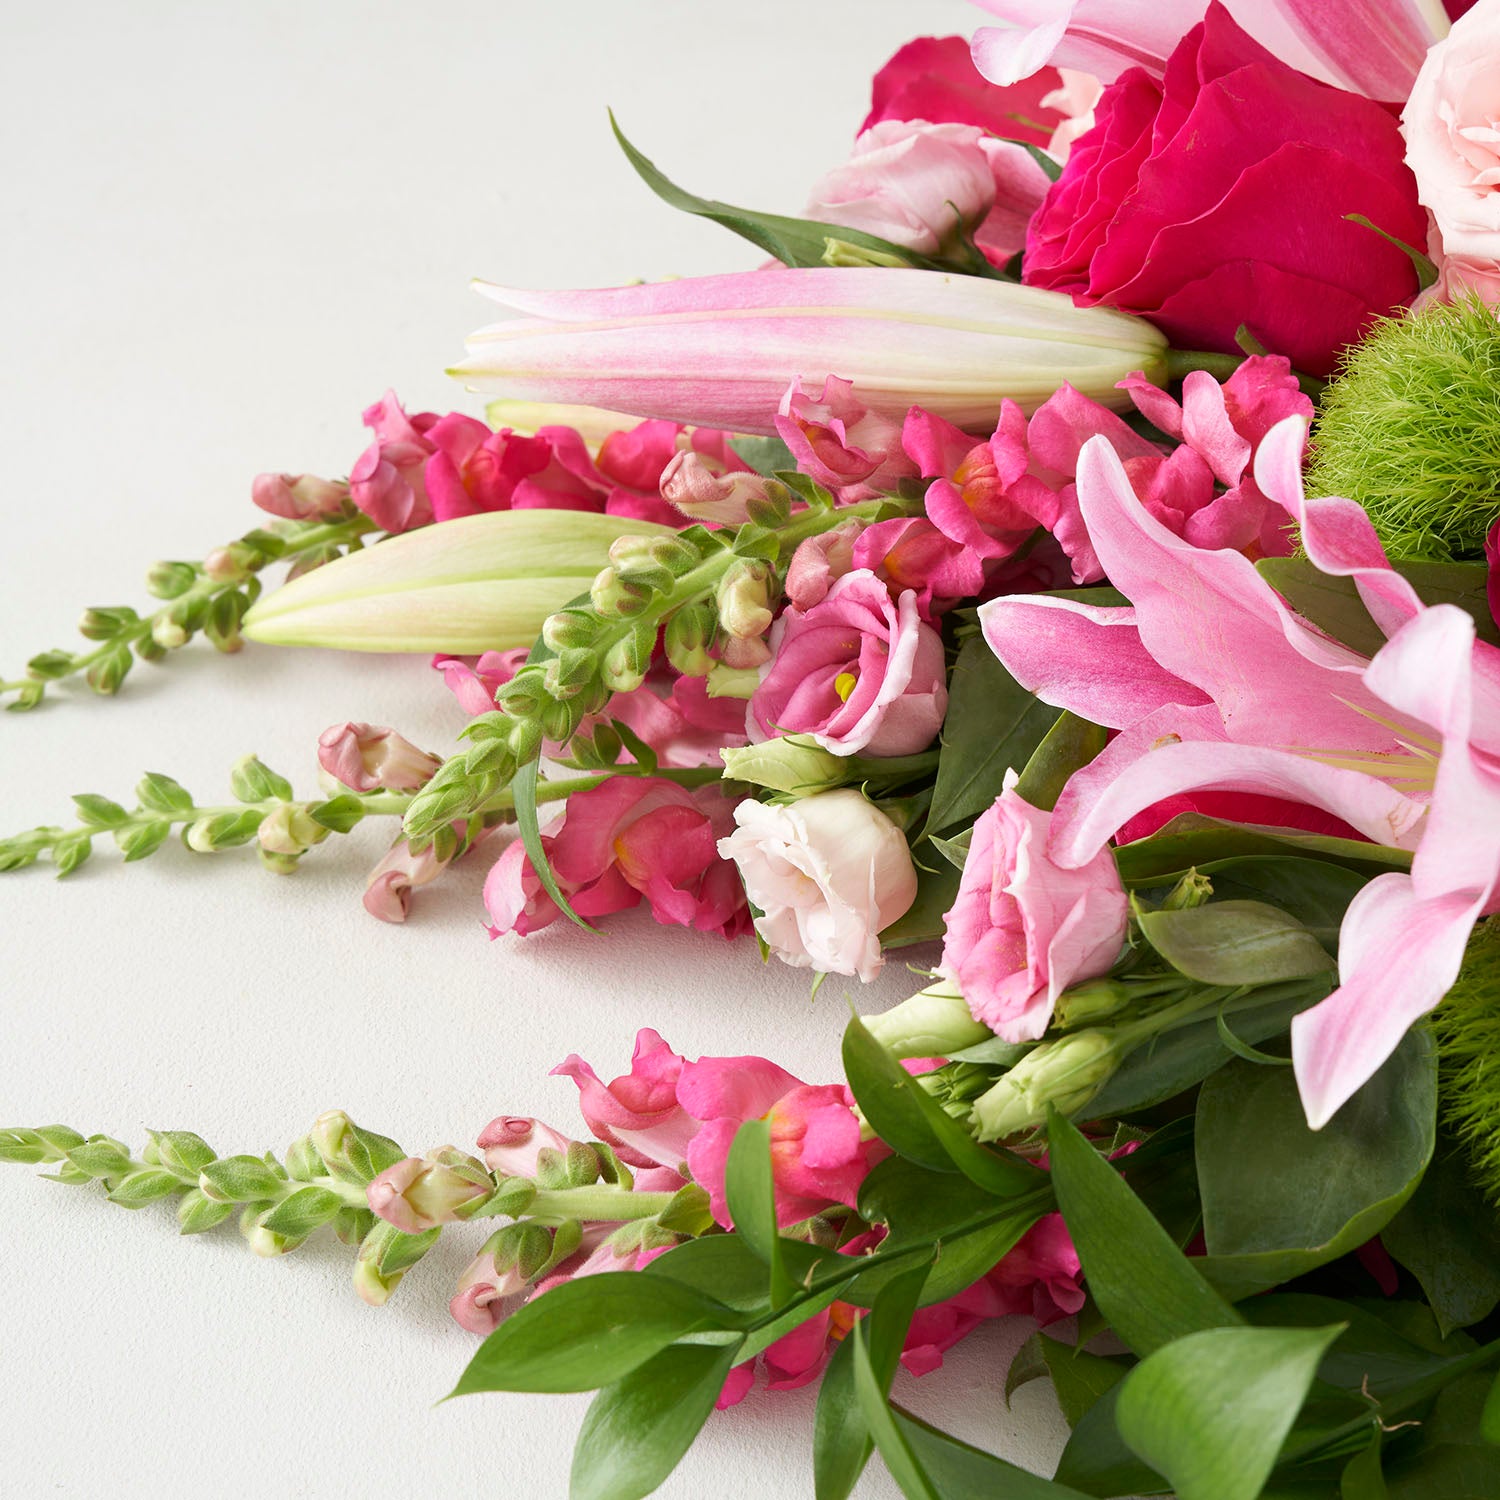 Closeup of bouquet of pink lilies, pink roses, pink snapdragons and pink lisianthus.